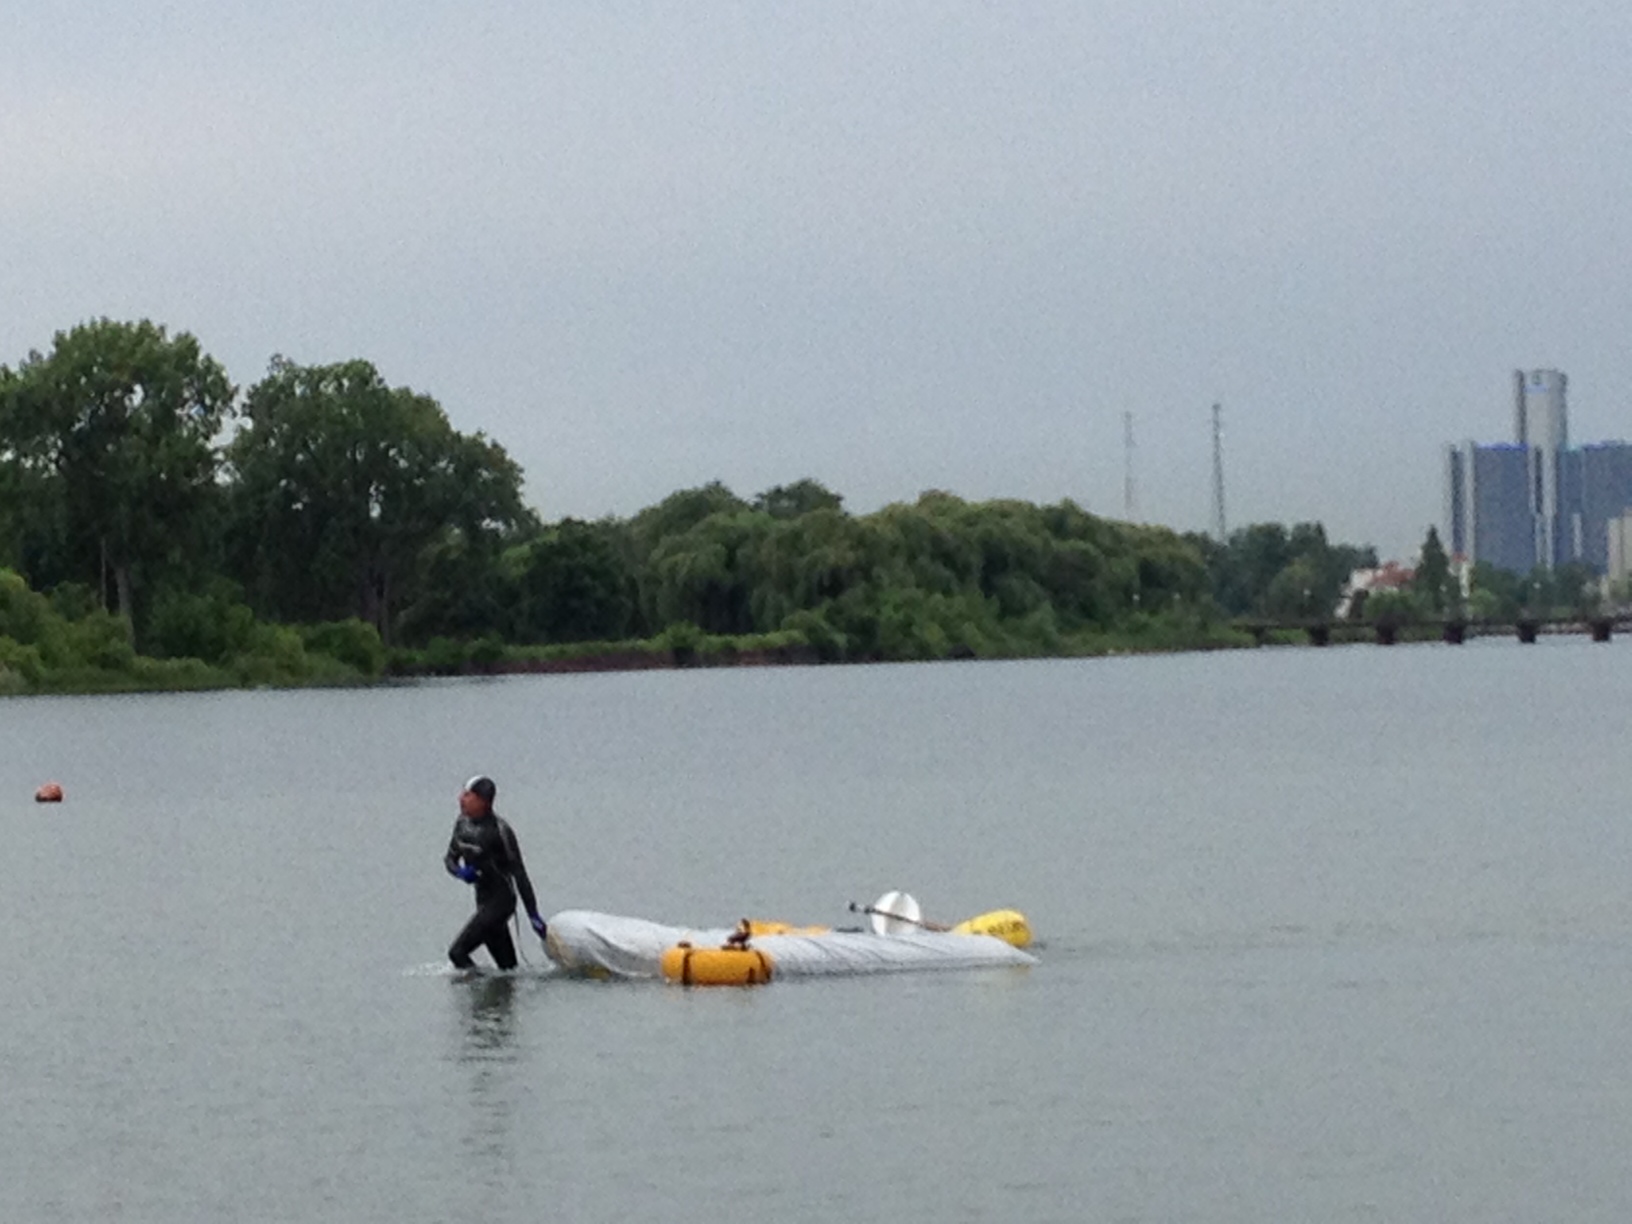 Jim Dreyer comes ashore at Bell Isle. (credit: Mike Campbell/WWJ)